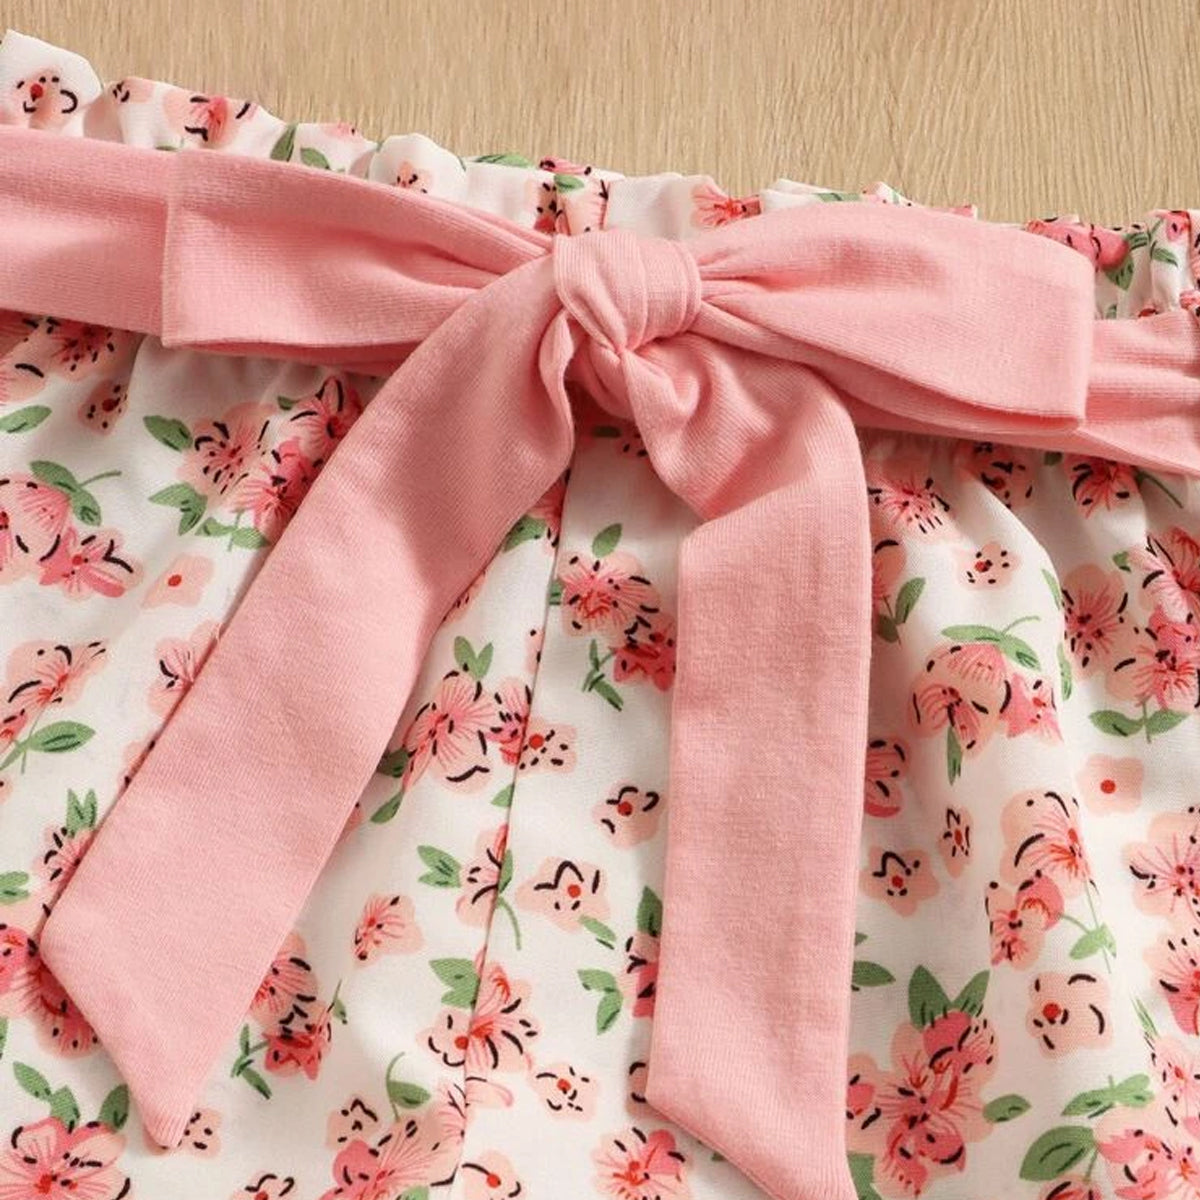 Crop Pink Floral Stylish Butterfly Belted Shorts For Baby Girls.